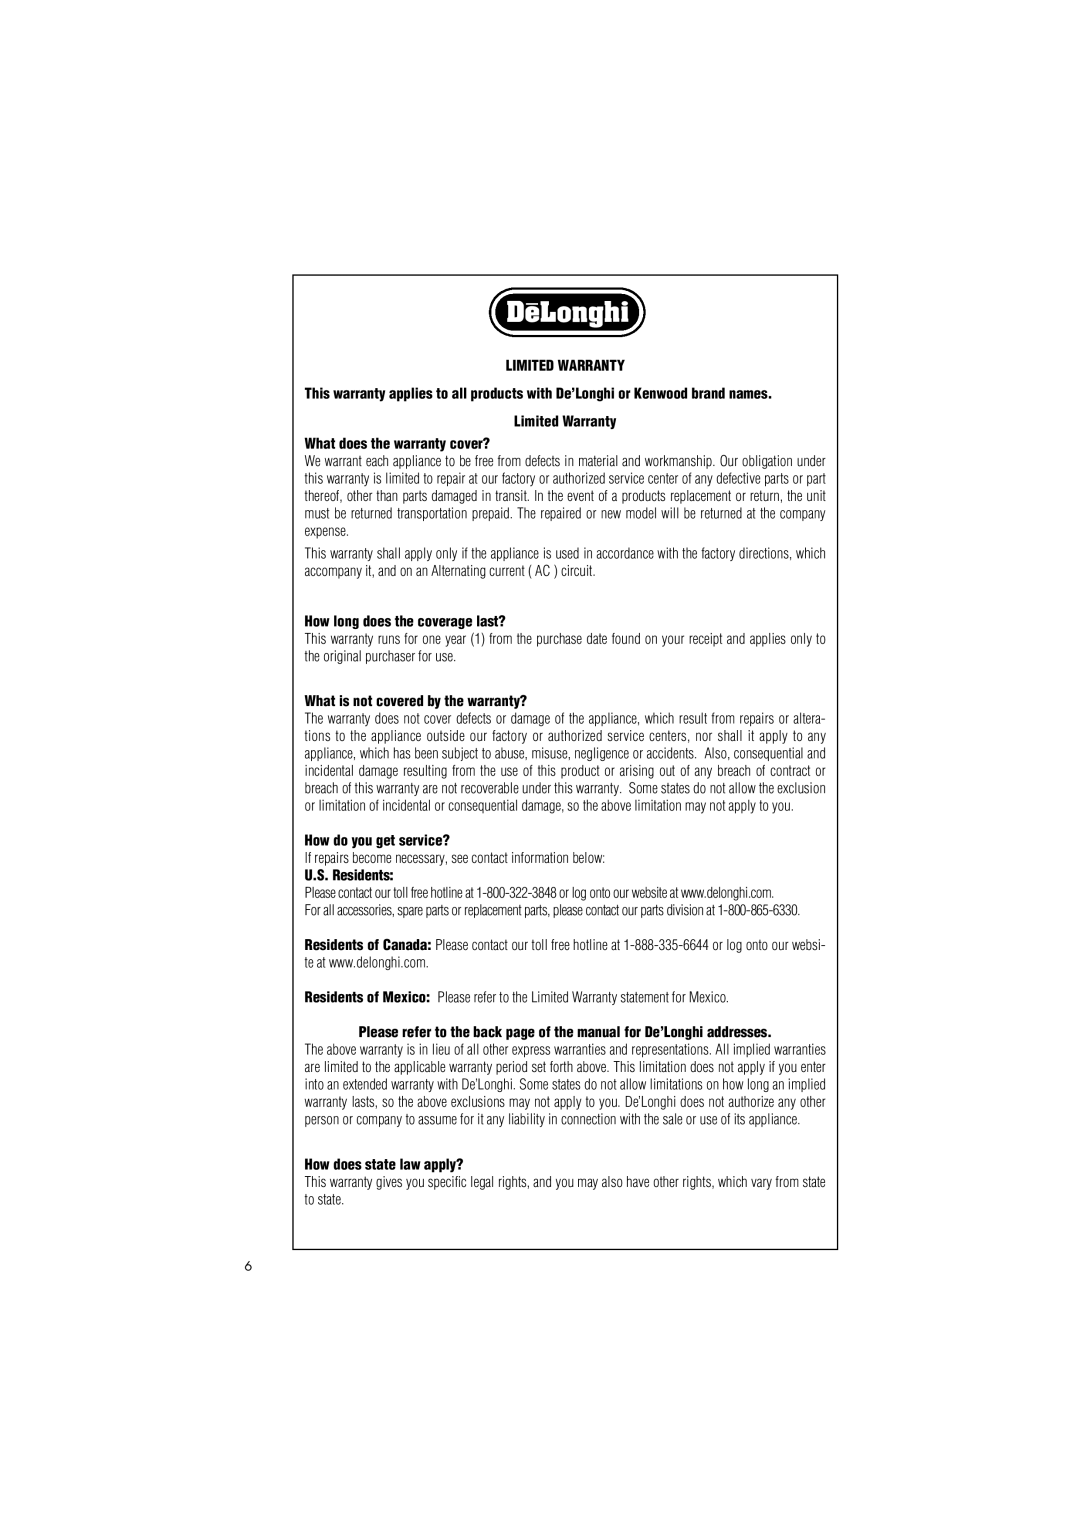 DeLonghi Utility Heater manual Limited Warranty What does the warranty cover?, How long does the coverage last? 